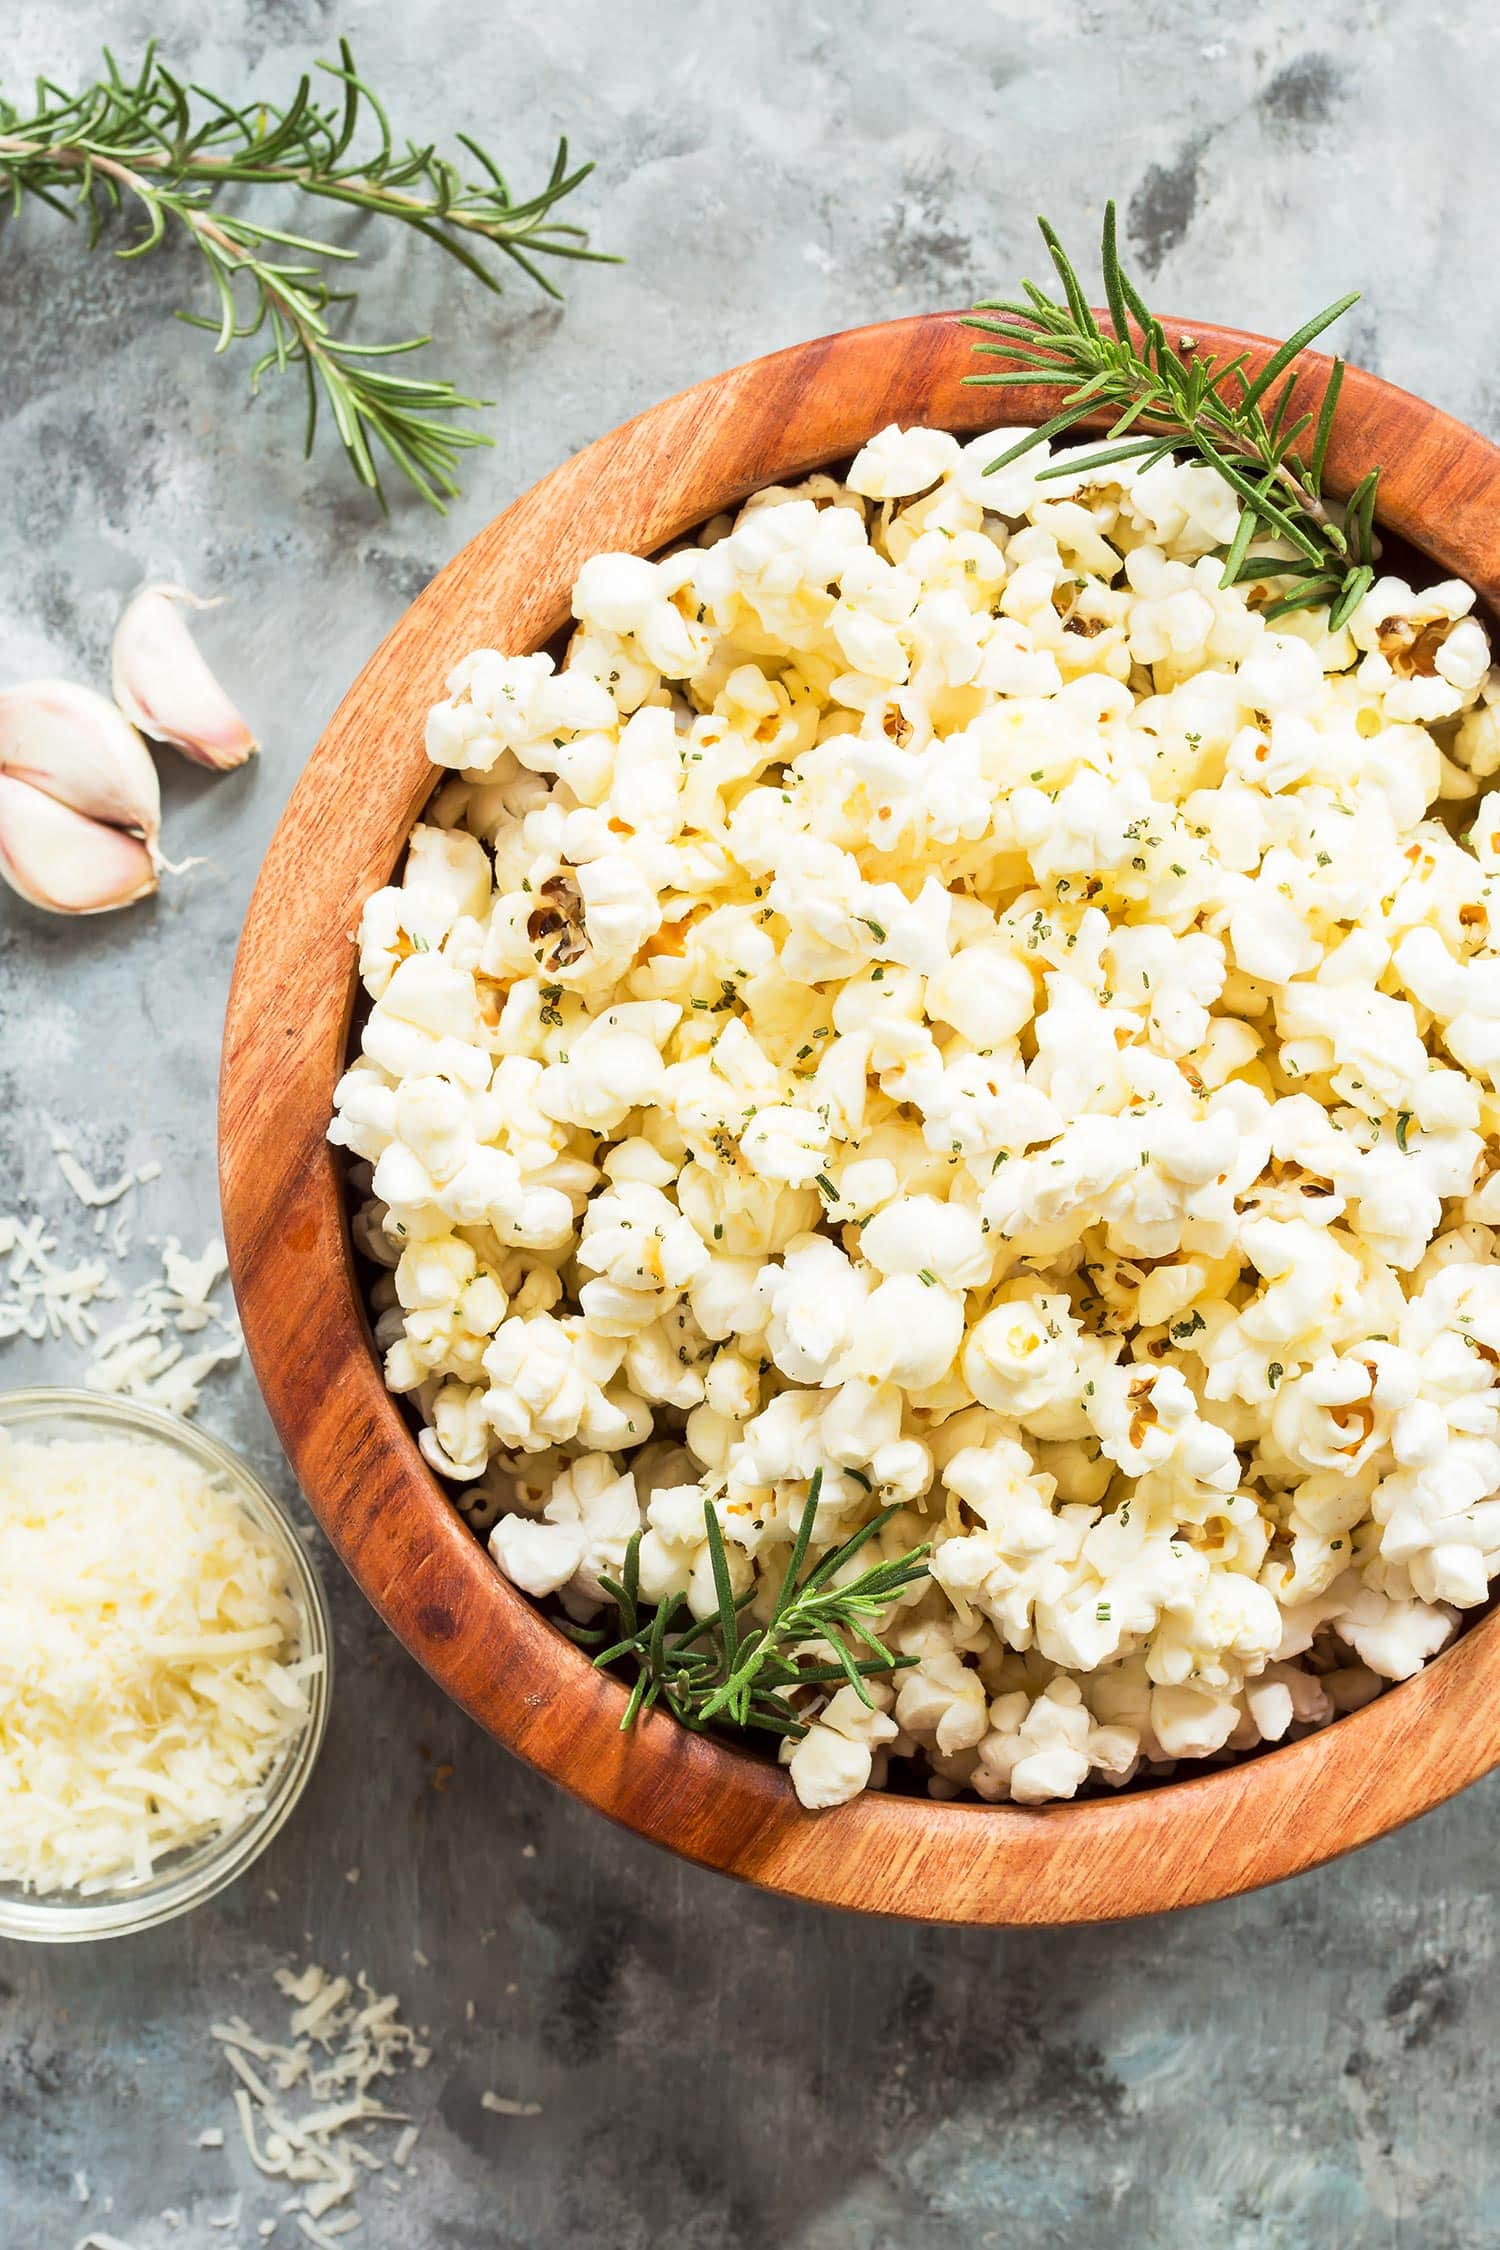 Rosemary parmesan popcorn in wooden bowl